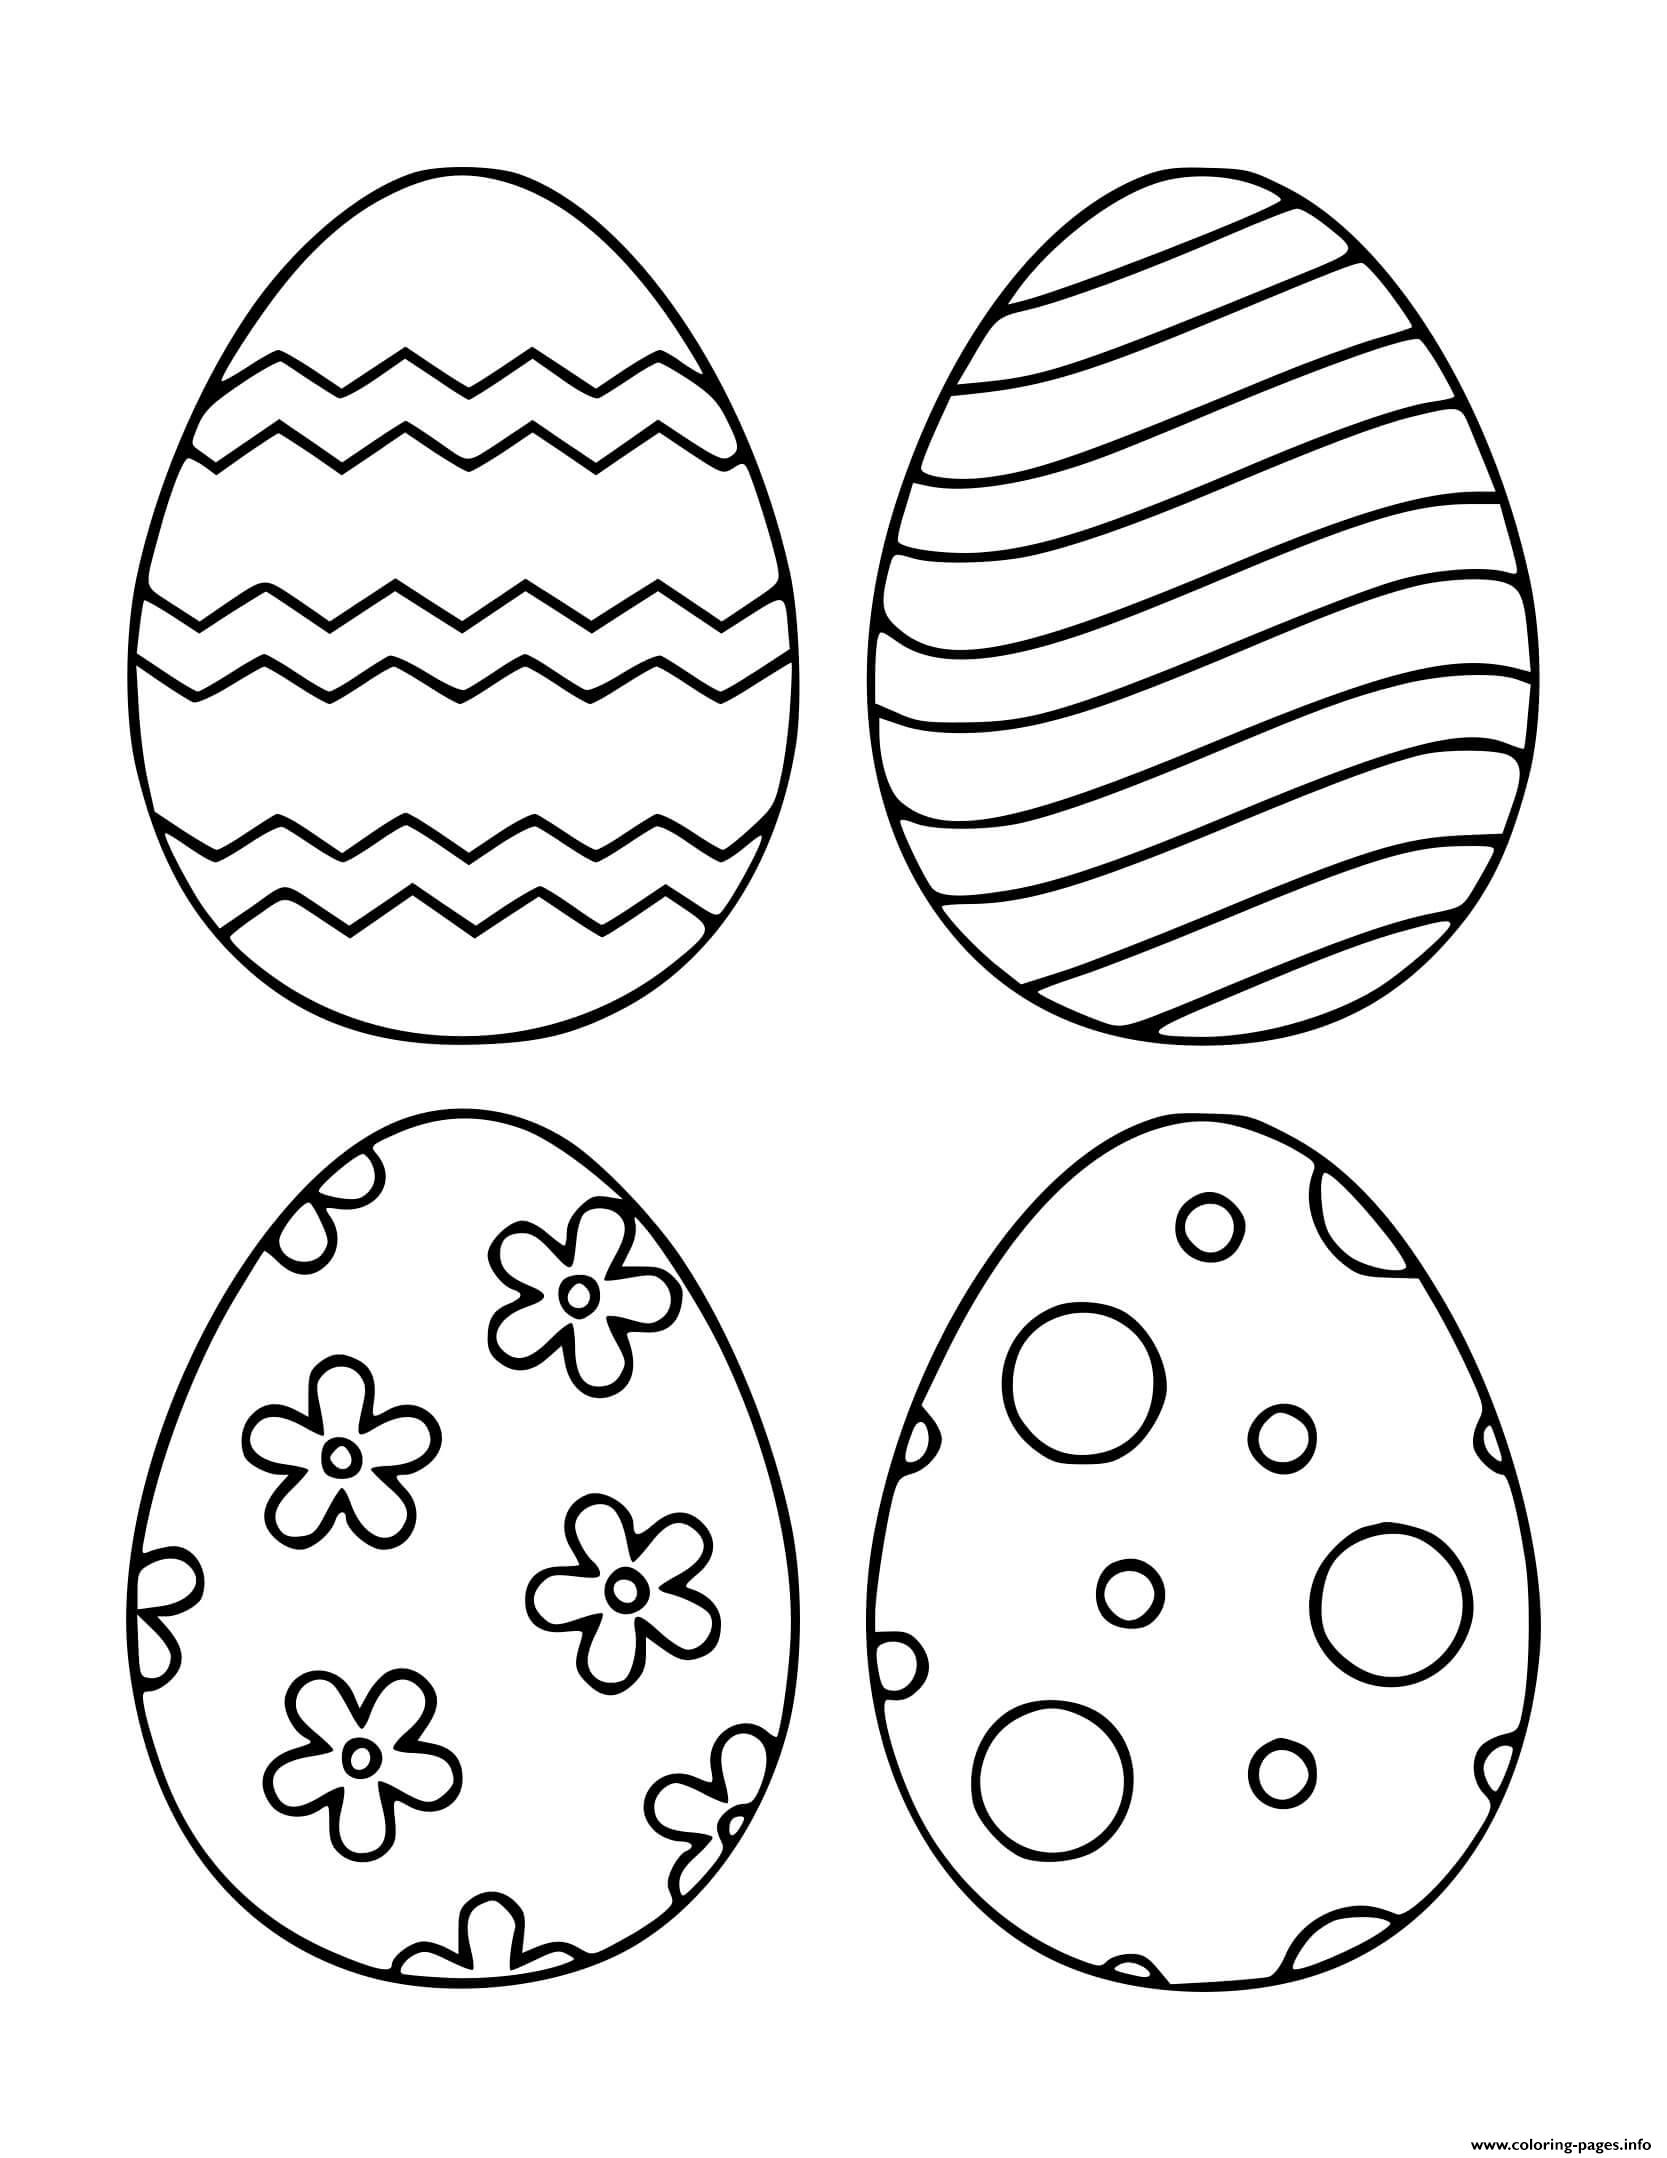 Easter Egg Coloring Patterns For Kids Coloring Pages